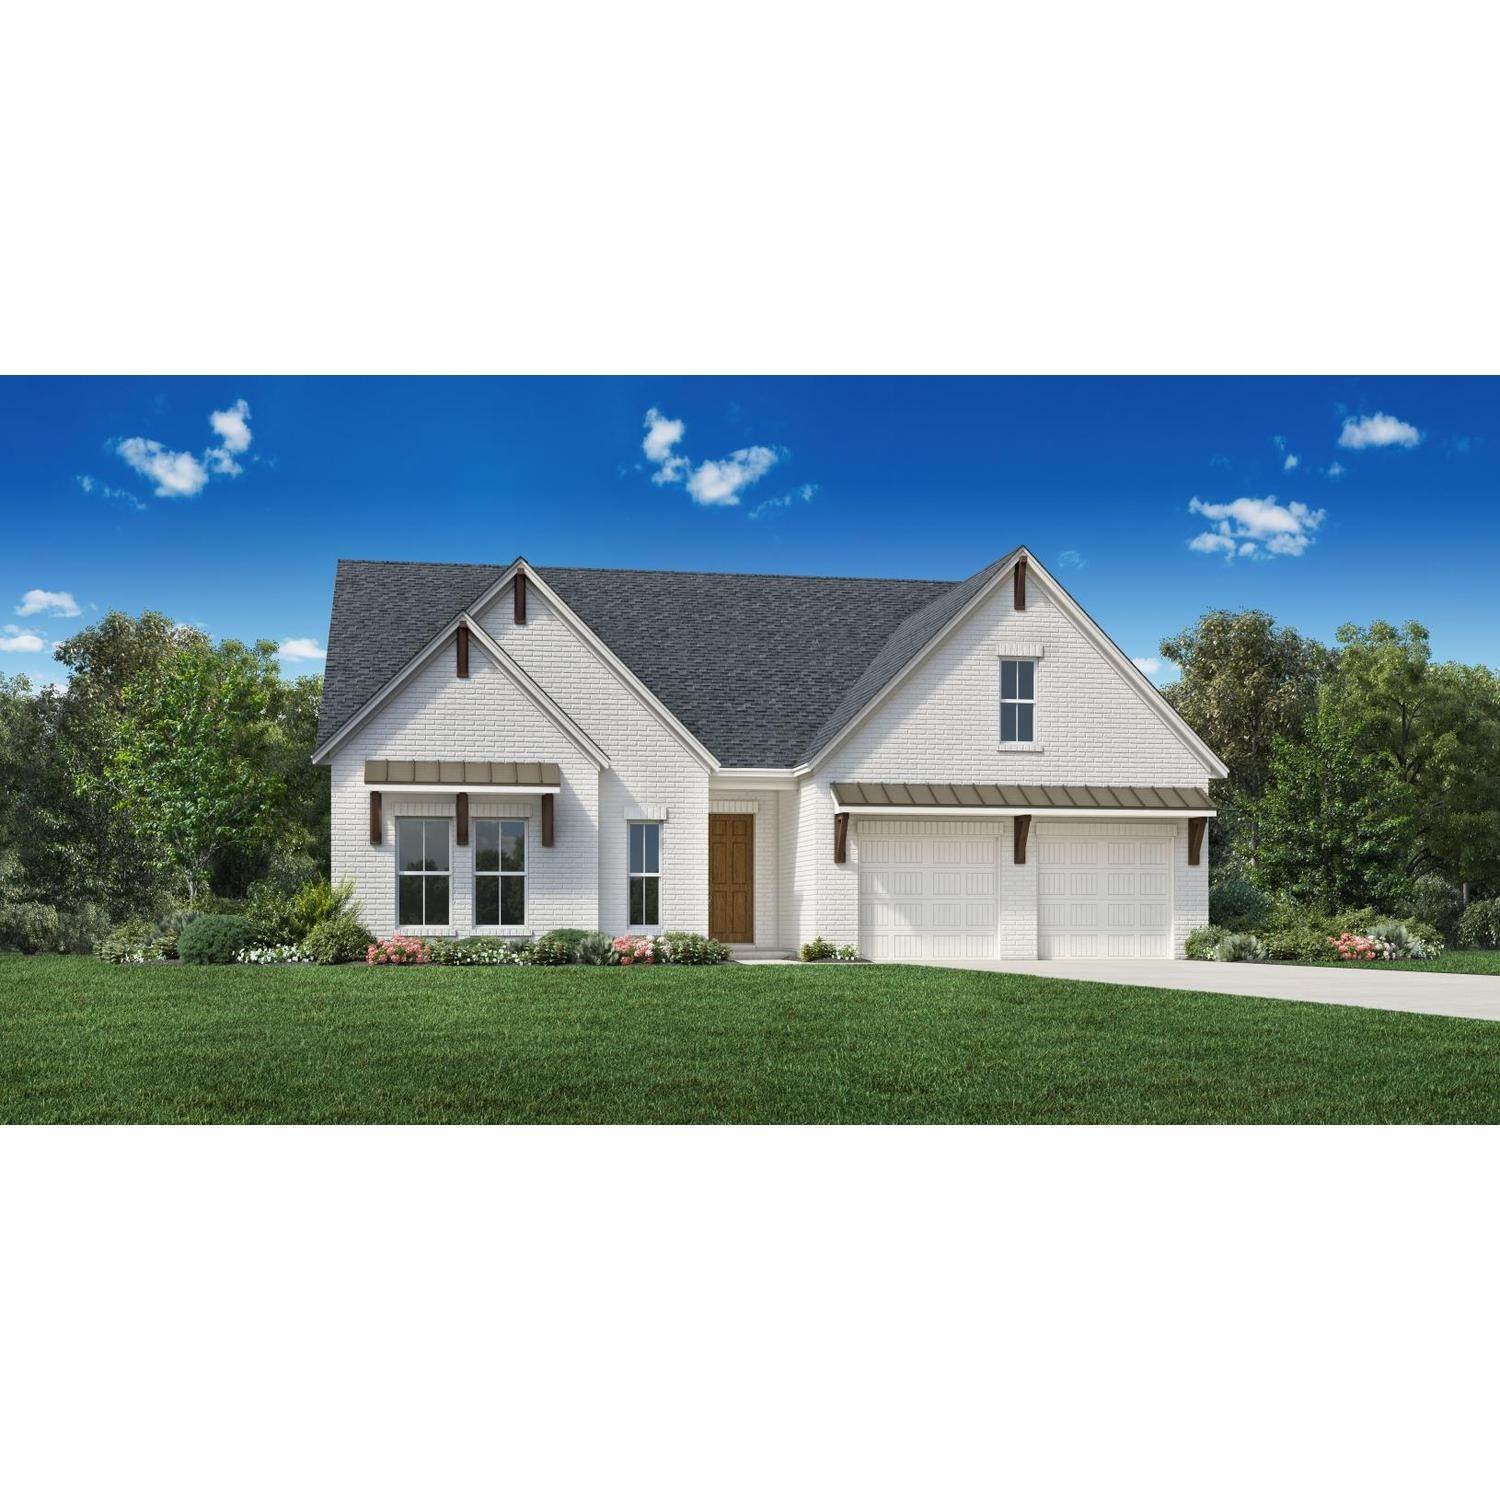 Single Family for Sale at Northbrooke Cumming, GA 30028